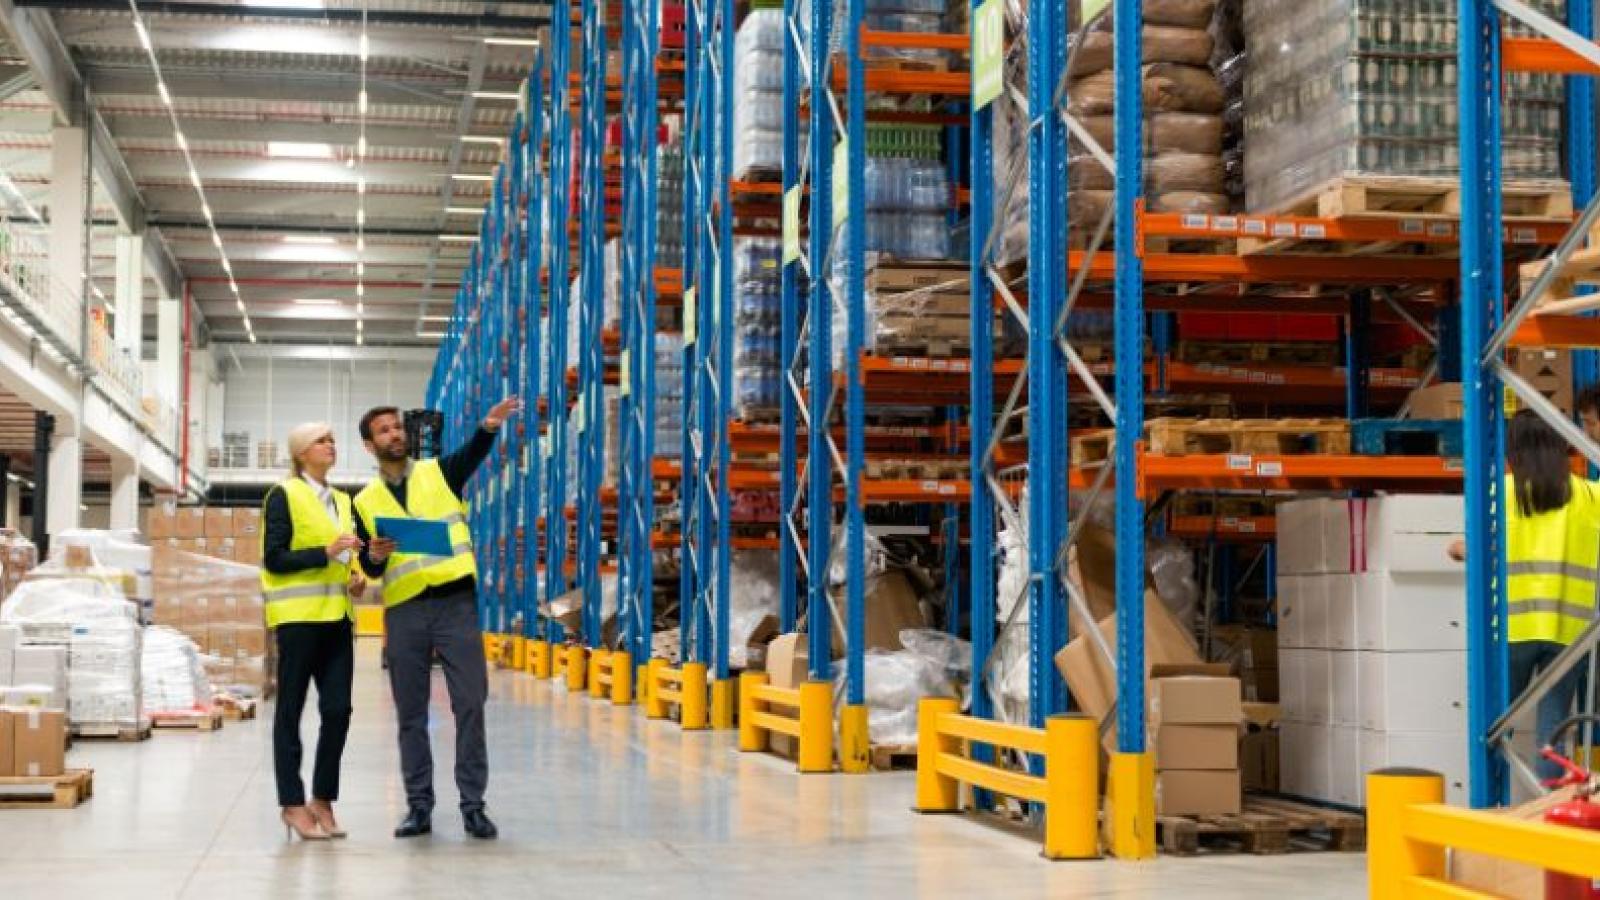 Warehouse inventory management